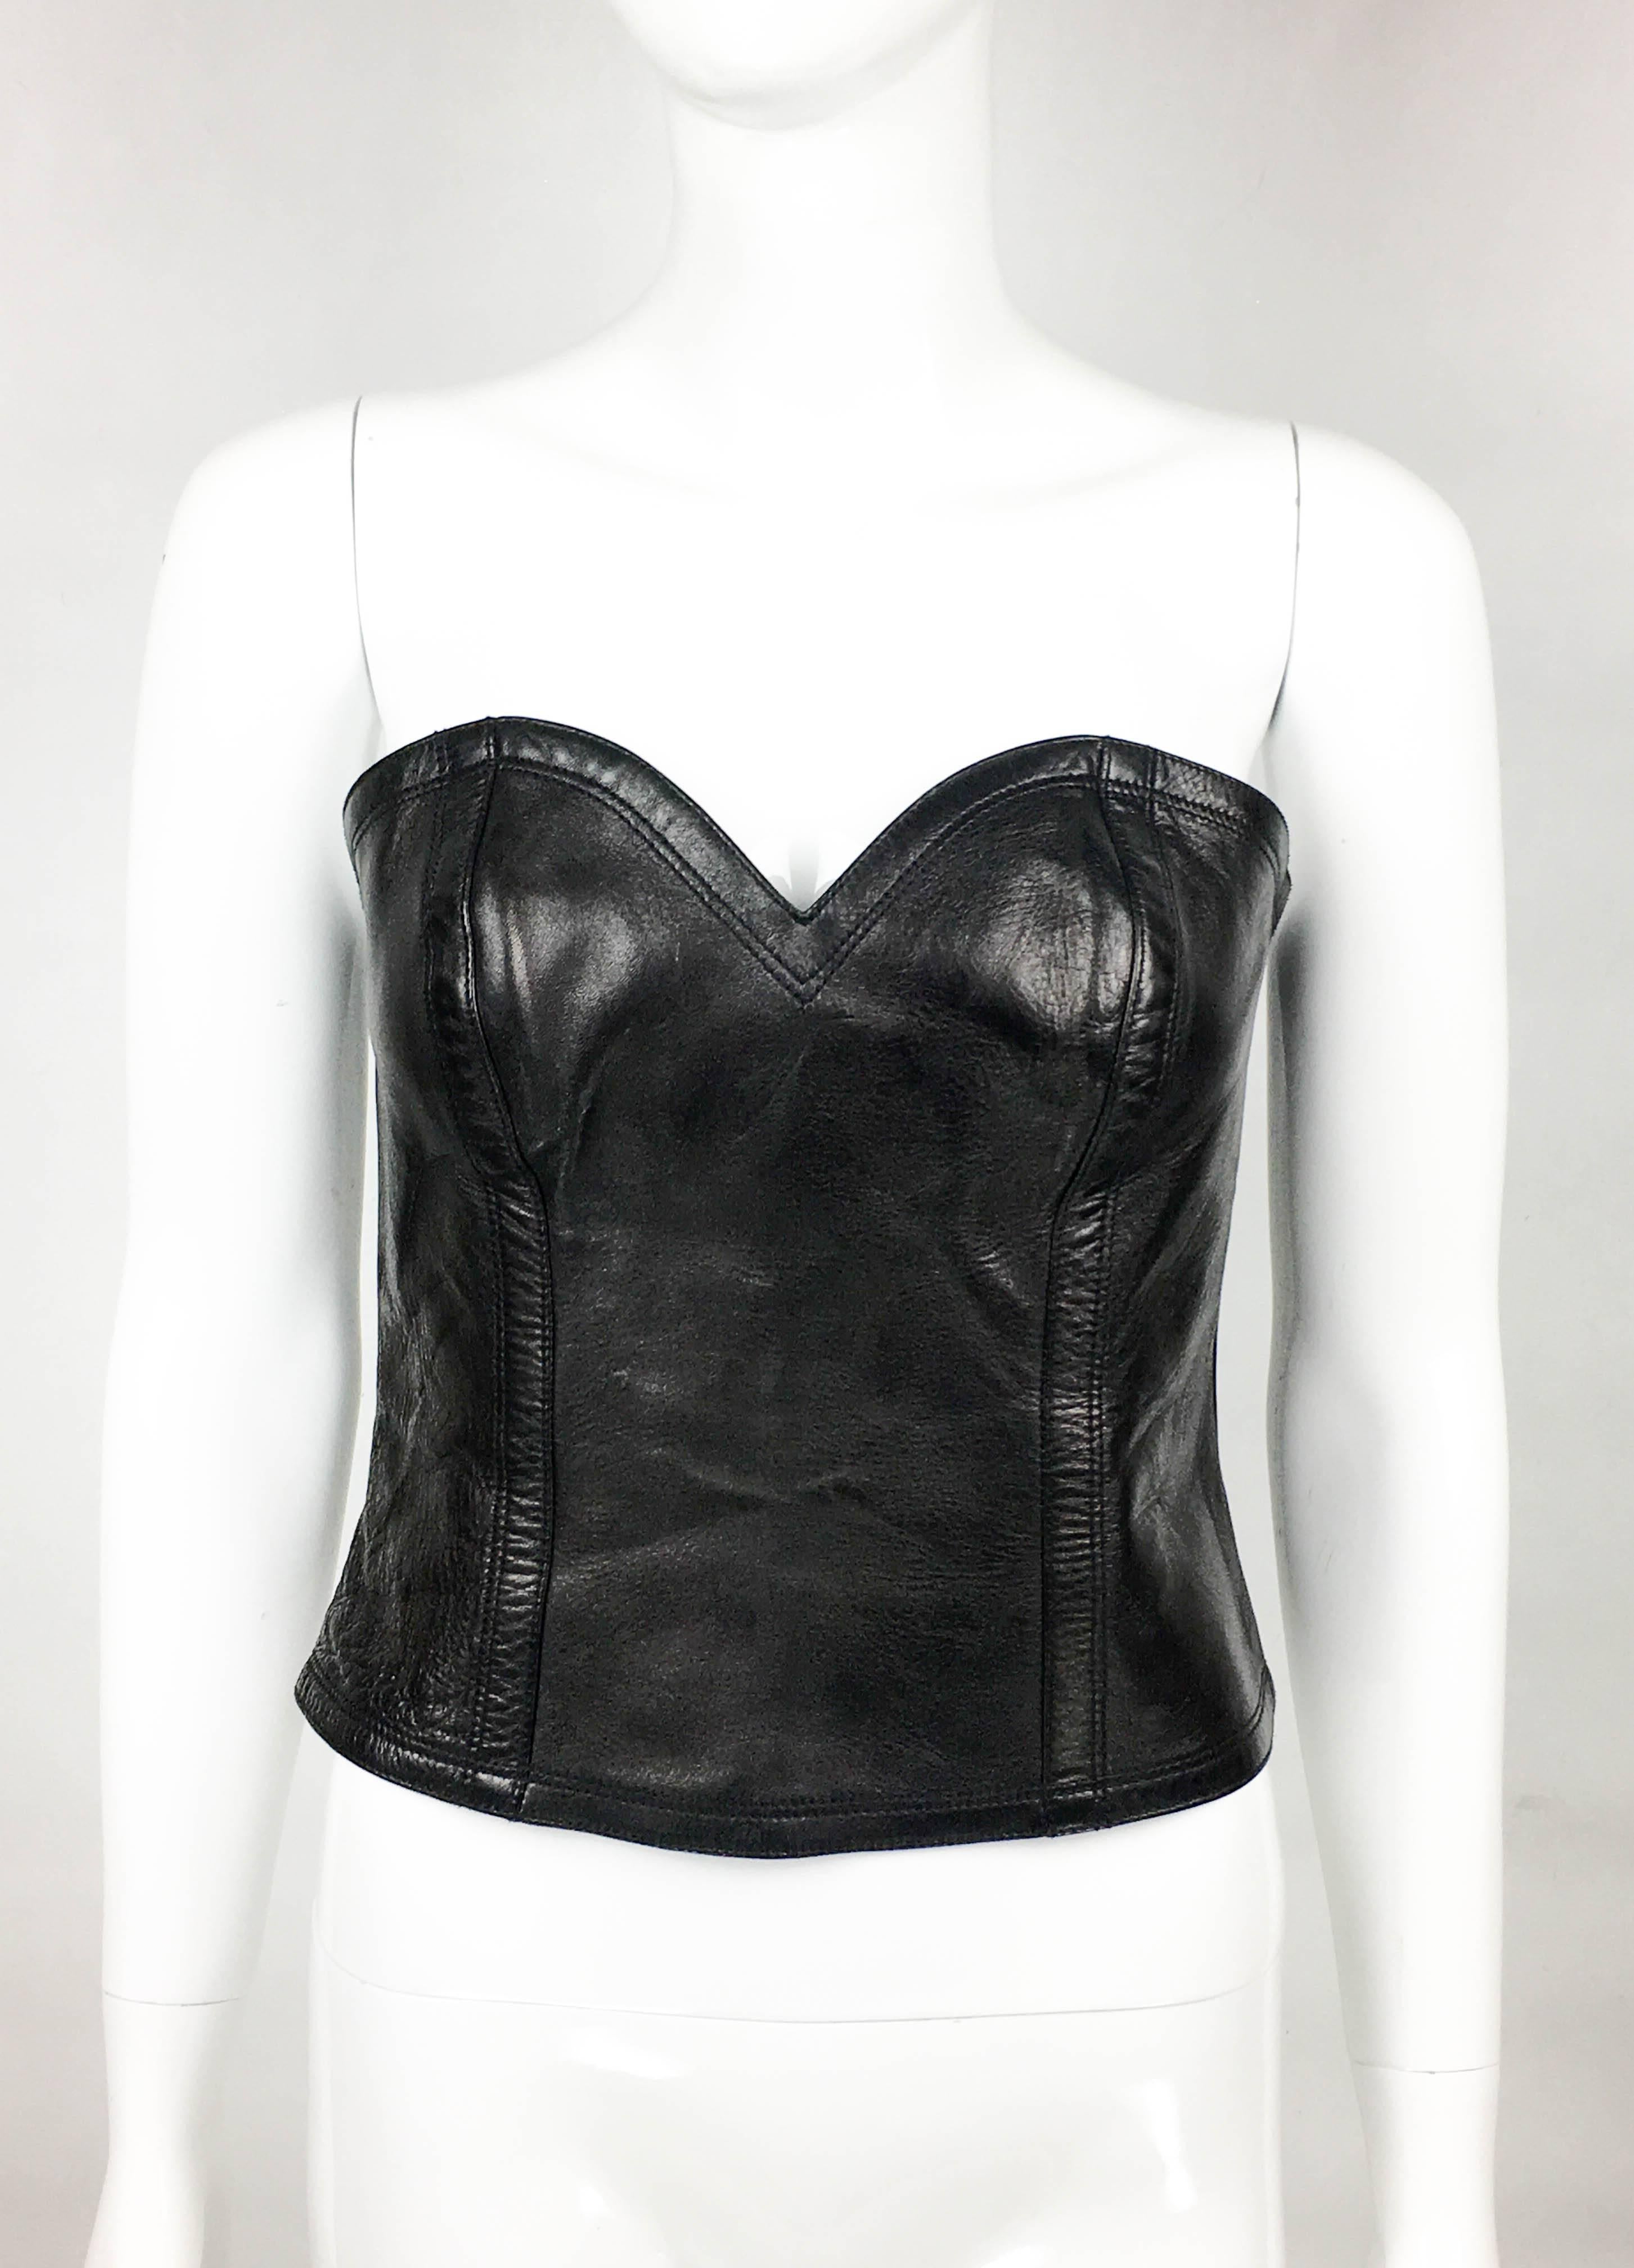 Yves Saint Laurent Runway Look Black Leather Bustier 2009  In New Condition In London, Chelsea